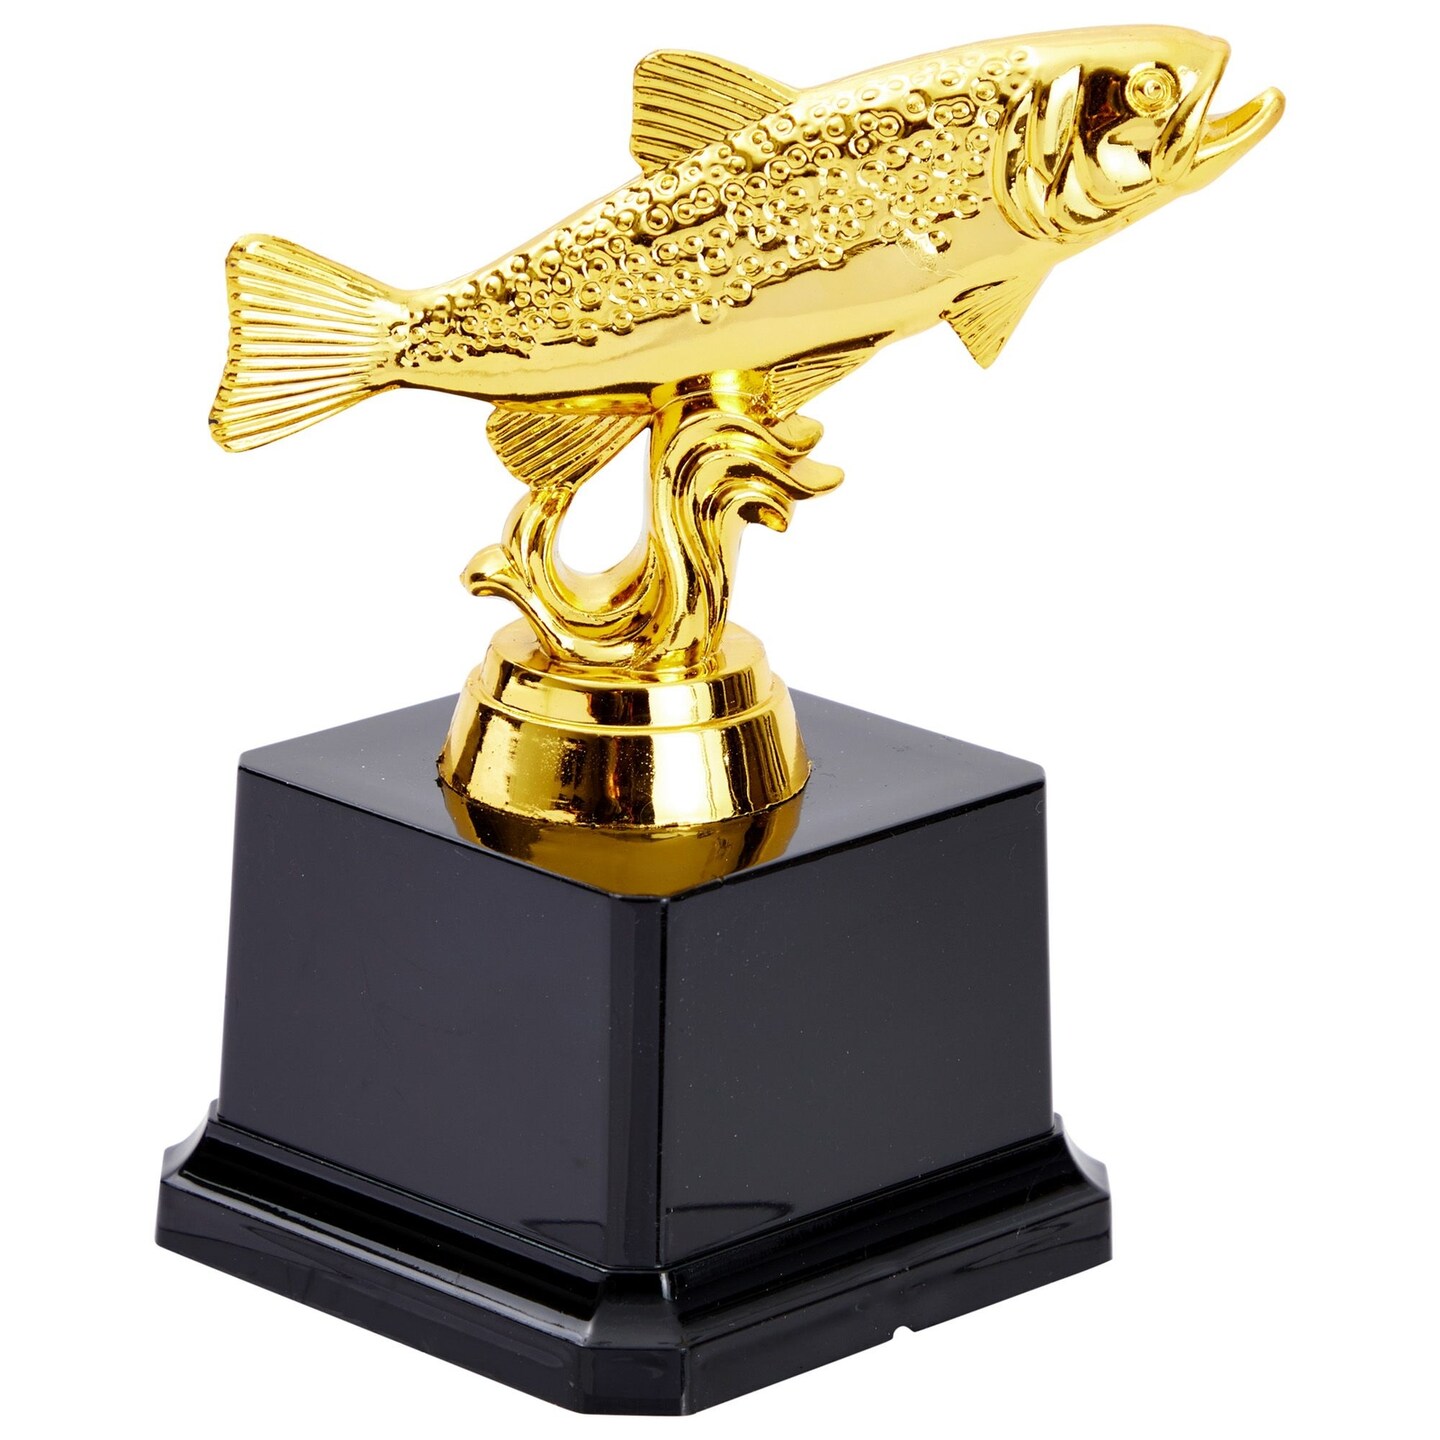 Small Fish Trophy, Golden Fishing Award for Tournaments and Competitions (3x5 in)